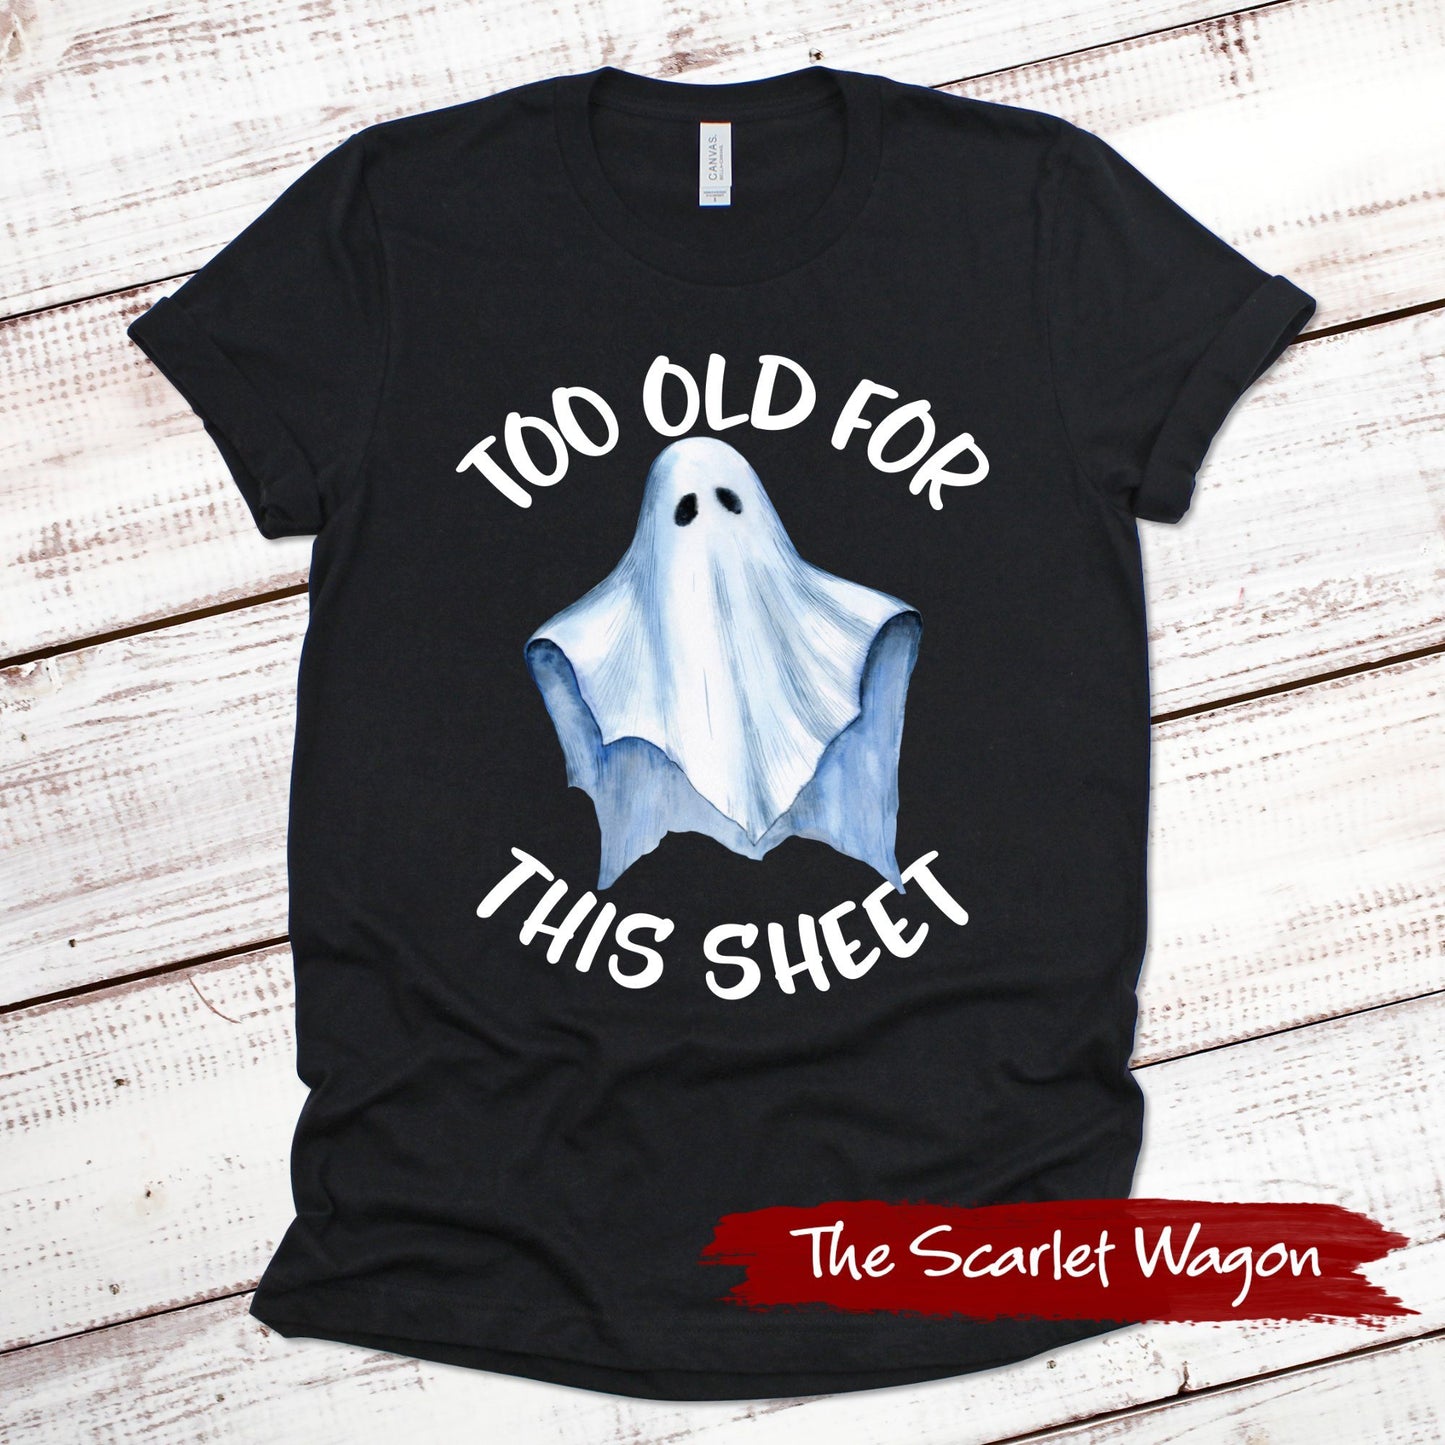 Too Old for This Sheet Halloween Shirt Scarlet Wagon Black XS 